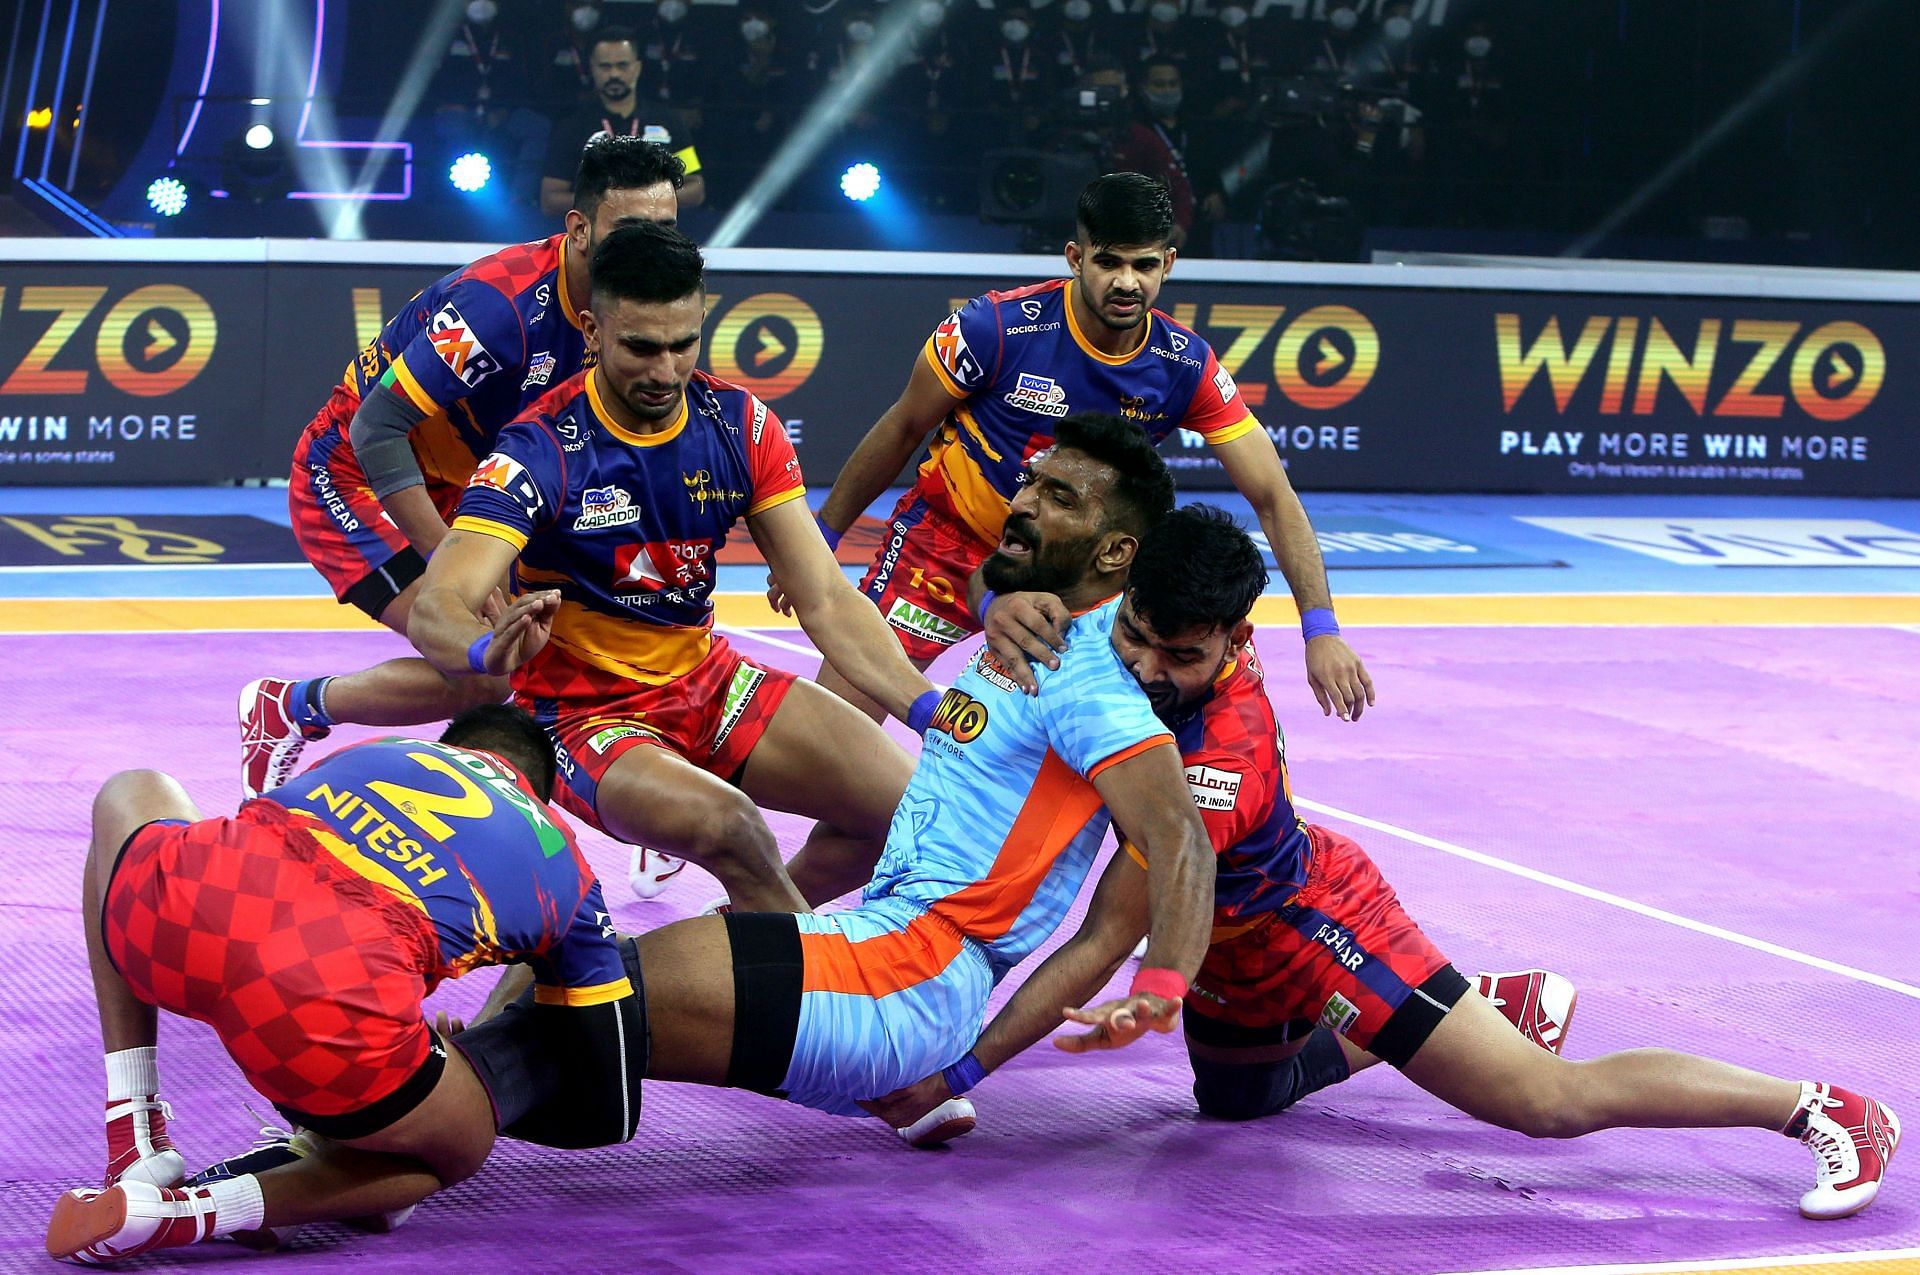 UP Yoddha players during a tackle against the Bengal Warriors - Image Courtesy: UP Yoddha Twitter